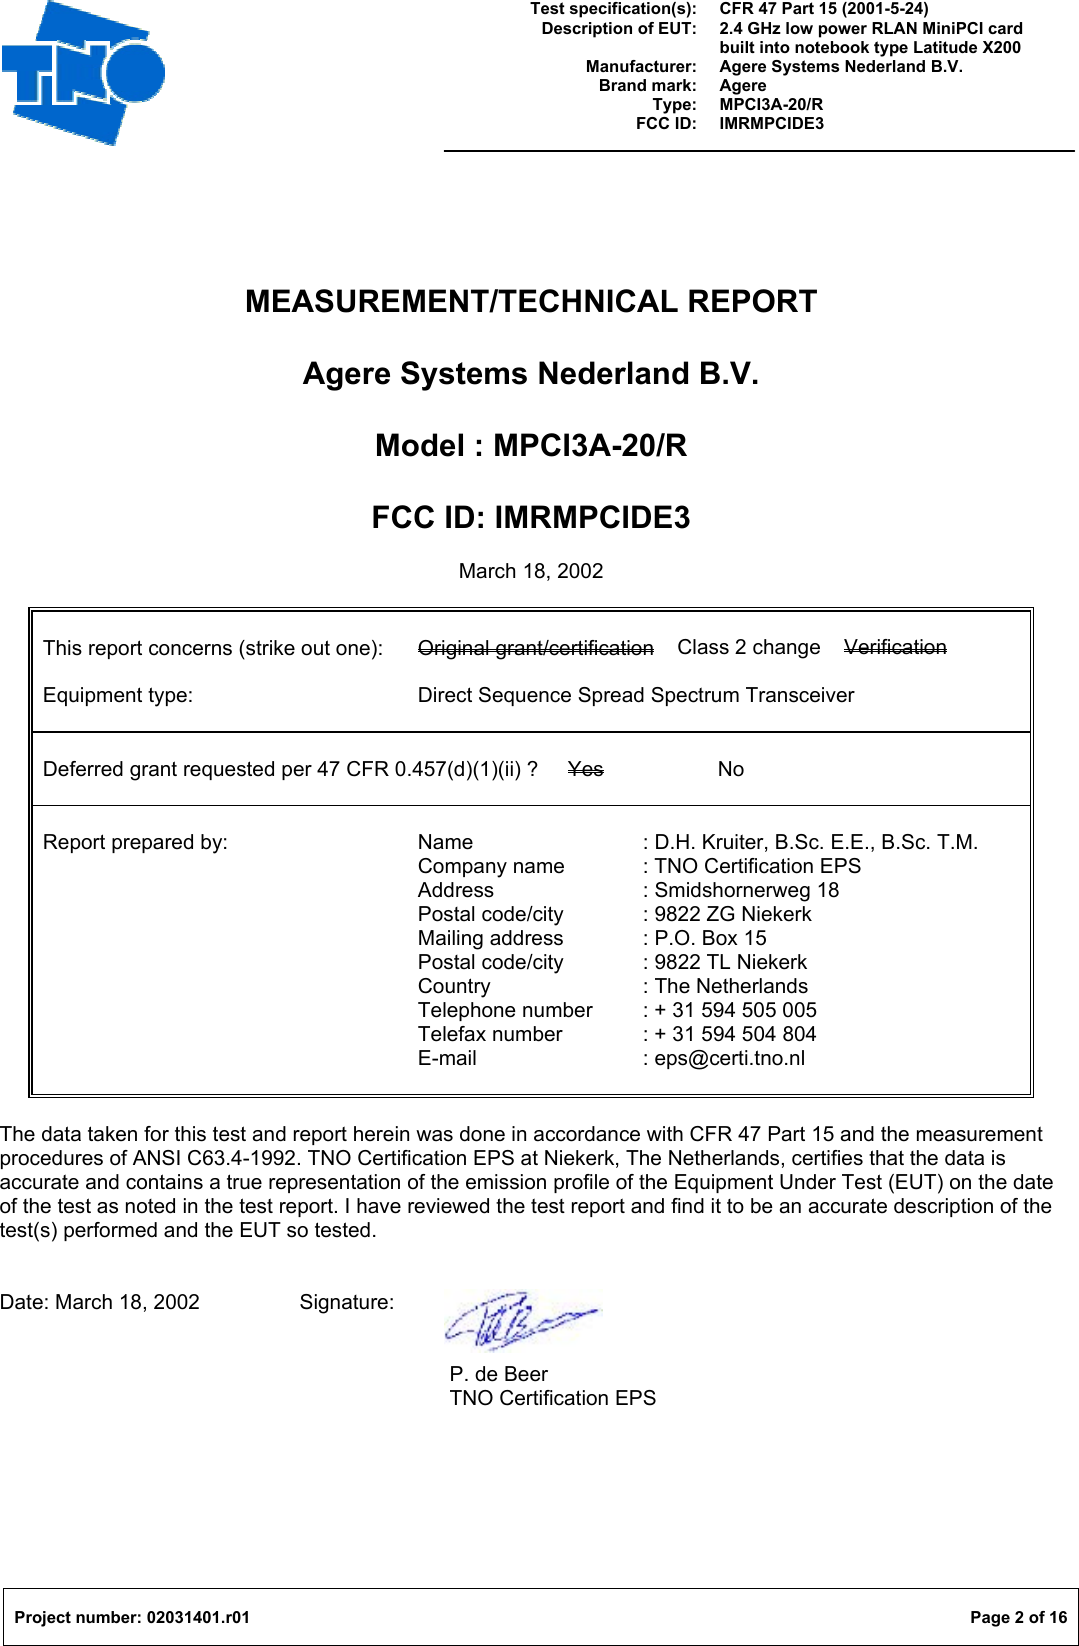  Test specification(s): Description of EUT:  Manufacturer: Brand mark: Type: FCC ID: CFR 47 Part 15 (2001-5-24) 2.4 GHz low power RLAN MiniPCI card built into notebook type Latitude X200 Agere Systems Nederland B.V. Agere MPCI3A-20/R IMRMPCIDE3   Project number: 02031401.r01  Page 2 of 16  MEASUREMENT/TECHNICAL REPORT  Agere Systems Nederland B.V.  Model : MPCI3A-20/R  FCC ID: IMRMPCIDE3  March 18, 2002   This report concerns (strike out one):  Original grant/certification    Class 2 change    Verification  Equipment type:      Direct Sequence Spread Spectrum Transceiver   Deferred grant requested per 47 CFR 0.457(d)(1)(ii) ?  Yes   No   Report prepared by:   Name   : D.H. Kruiter, B.Sc. E.E., B.Sc. T.M.      Company name  : TNO Certification EPS      Address  : Smidshornerweg 18      Postal code/city  : 9822 ZG Niekerk      Mailing address  : P.O. Box 15      Postal code/city  : 9822 TL Niekerk      Country   : The Netherlands            Telephone number  : + 31 594 505 005      Telefax number  : + 31 594 504 804      E-mail   : eps@certi.tno.nl         The data taken for this test and report herein was done in accordance with CFR 47 Part 15 and the measurement procedures of ANSI C63.4-1992. TNO Certification EPS at Niekerk, The Netherlands, certifies that the data is accurate and contains a true representation of the emission profile of the Equipment Under Test (EUT) on the date of the test as noted in the test report. I have reviewed the test report and find it to be an accurate description of the test(s) performed and the EUT so tested.   Date: March 18, 2002    Signature:       P. de Beer       TNO Certification EPS 